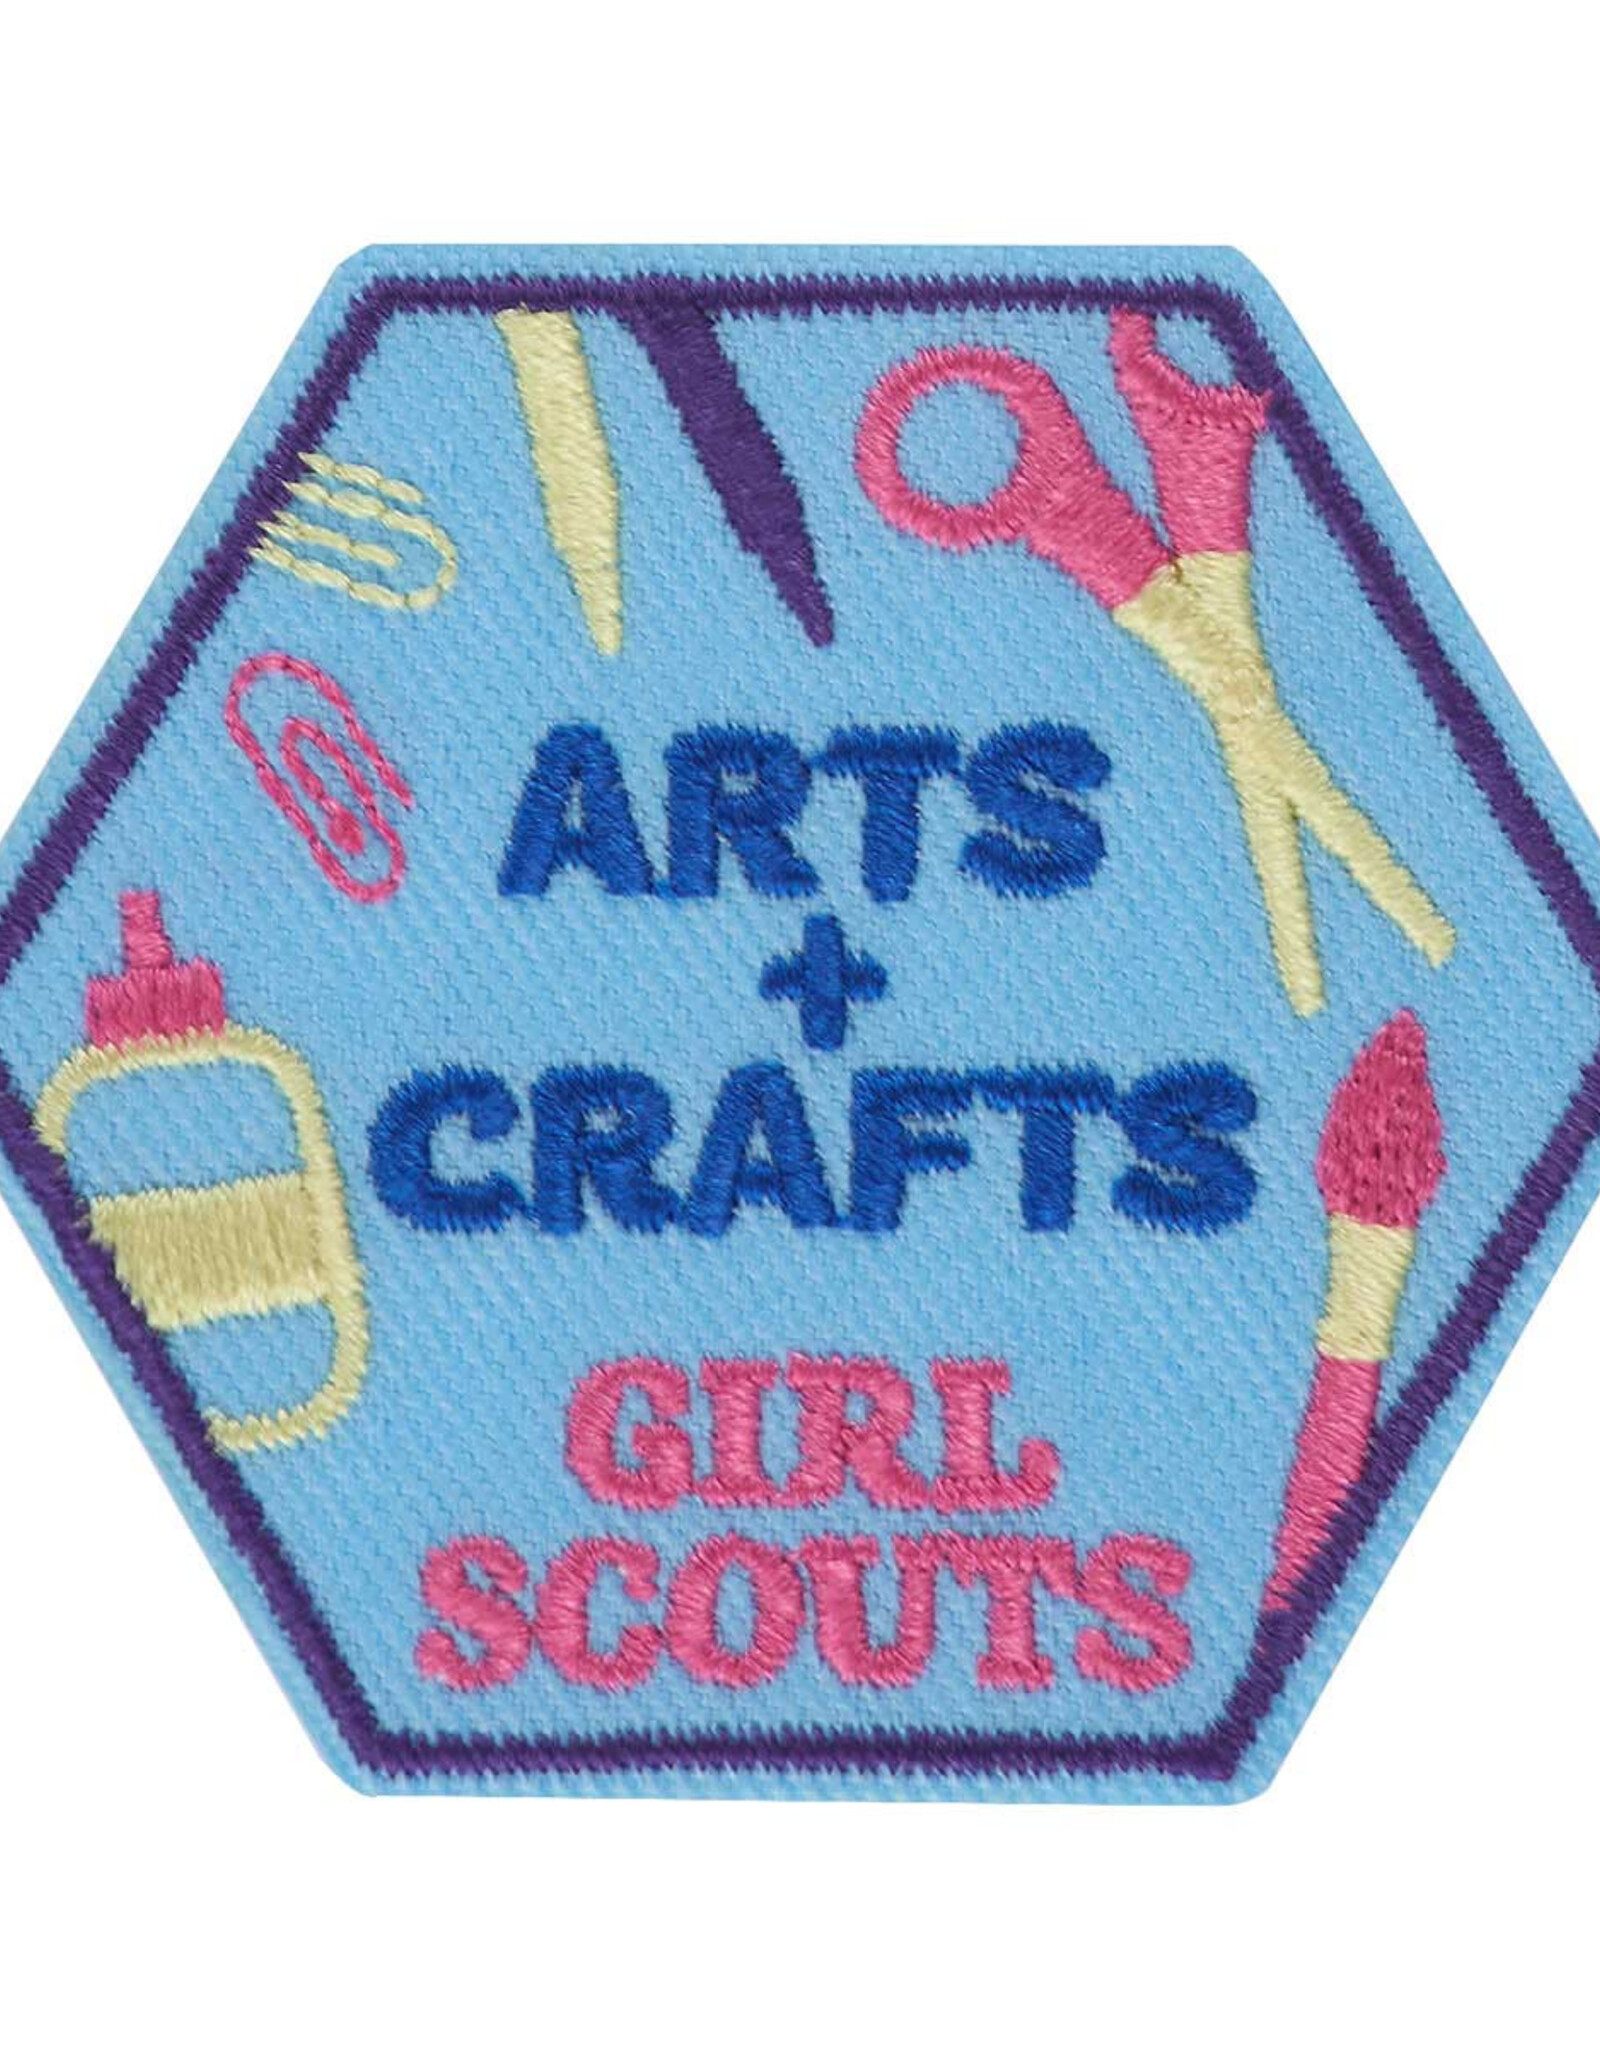 GSUSA Girl Scouts Arts & Crafts Iron on Patch